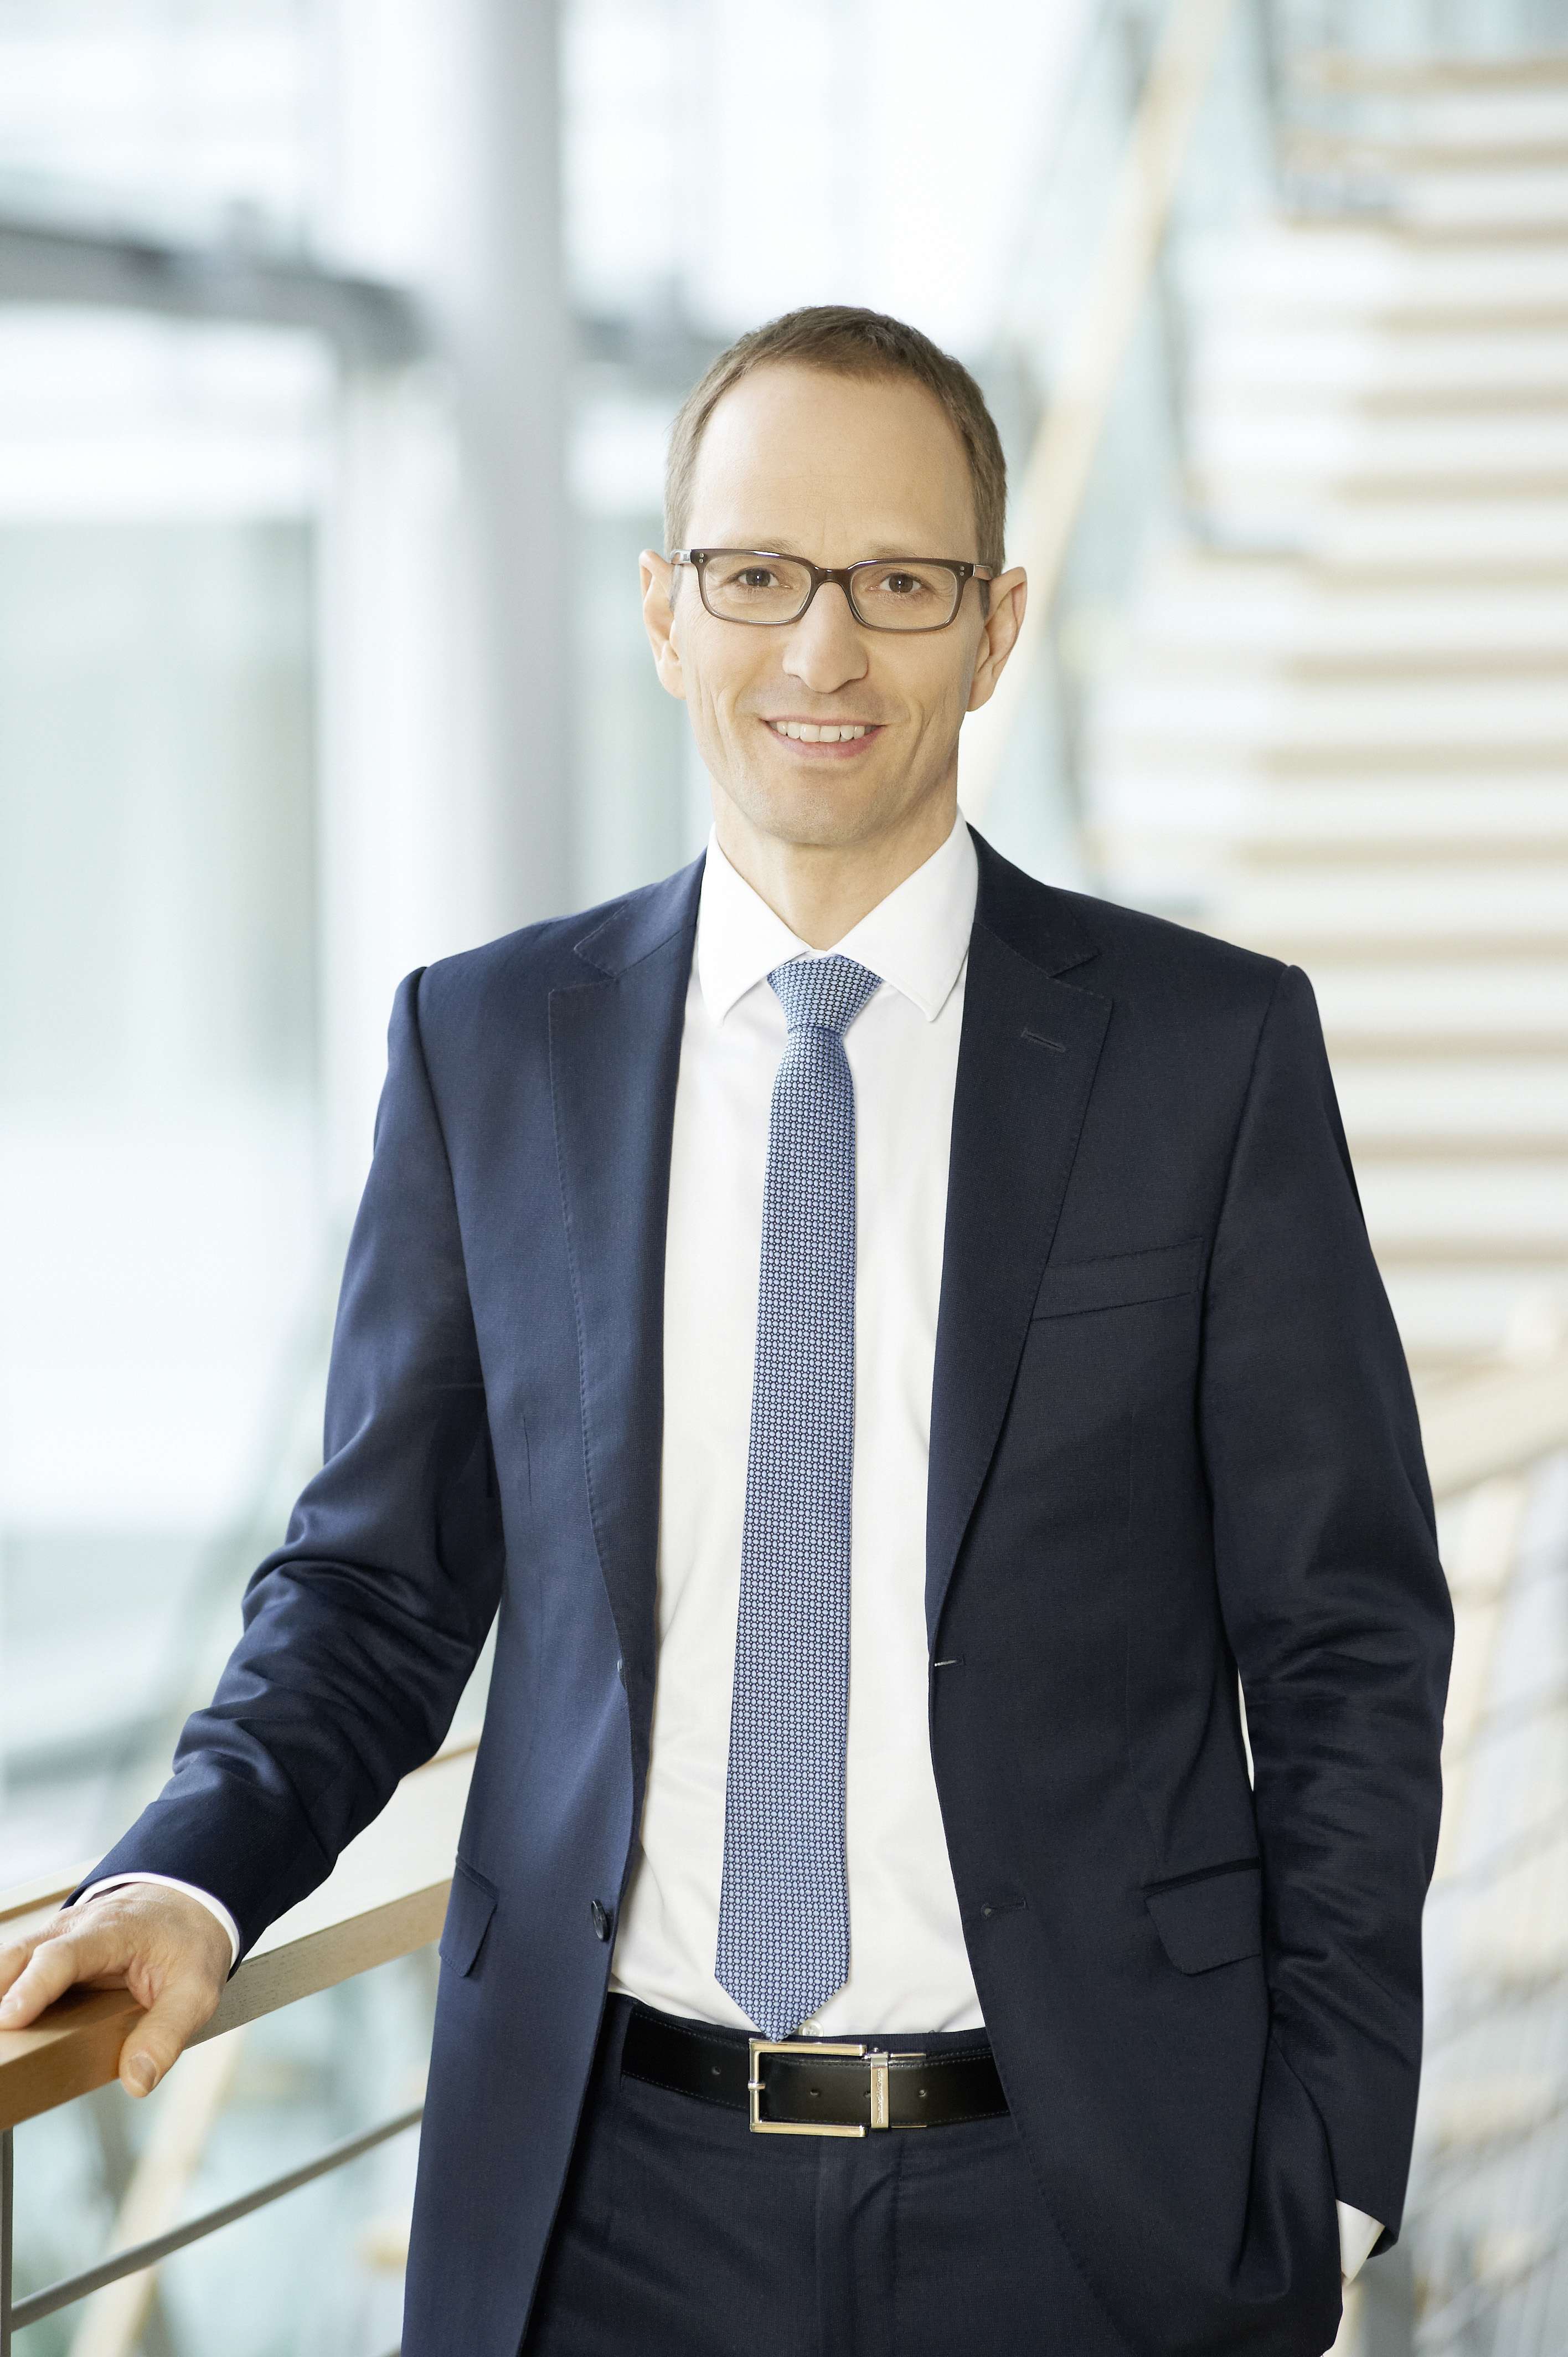 Dr Christian Rödl, chairman of the board and managing partner